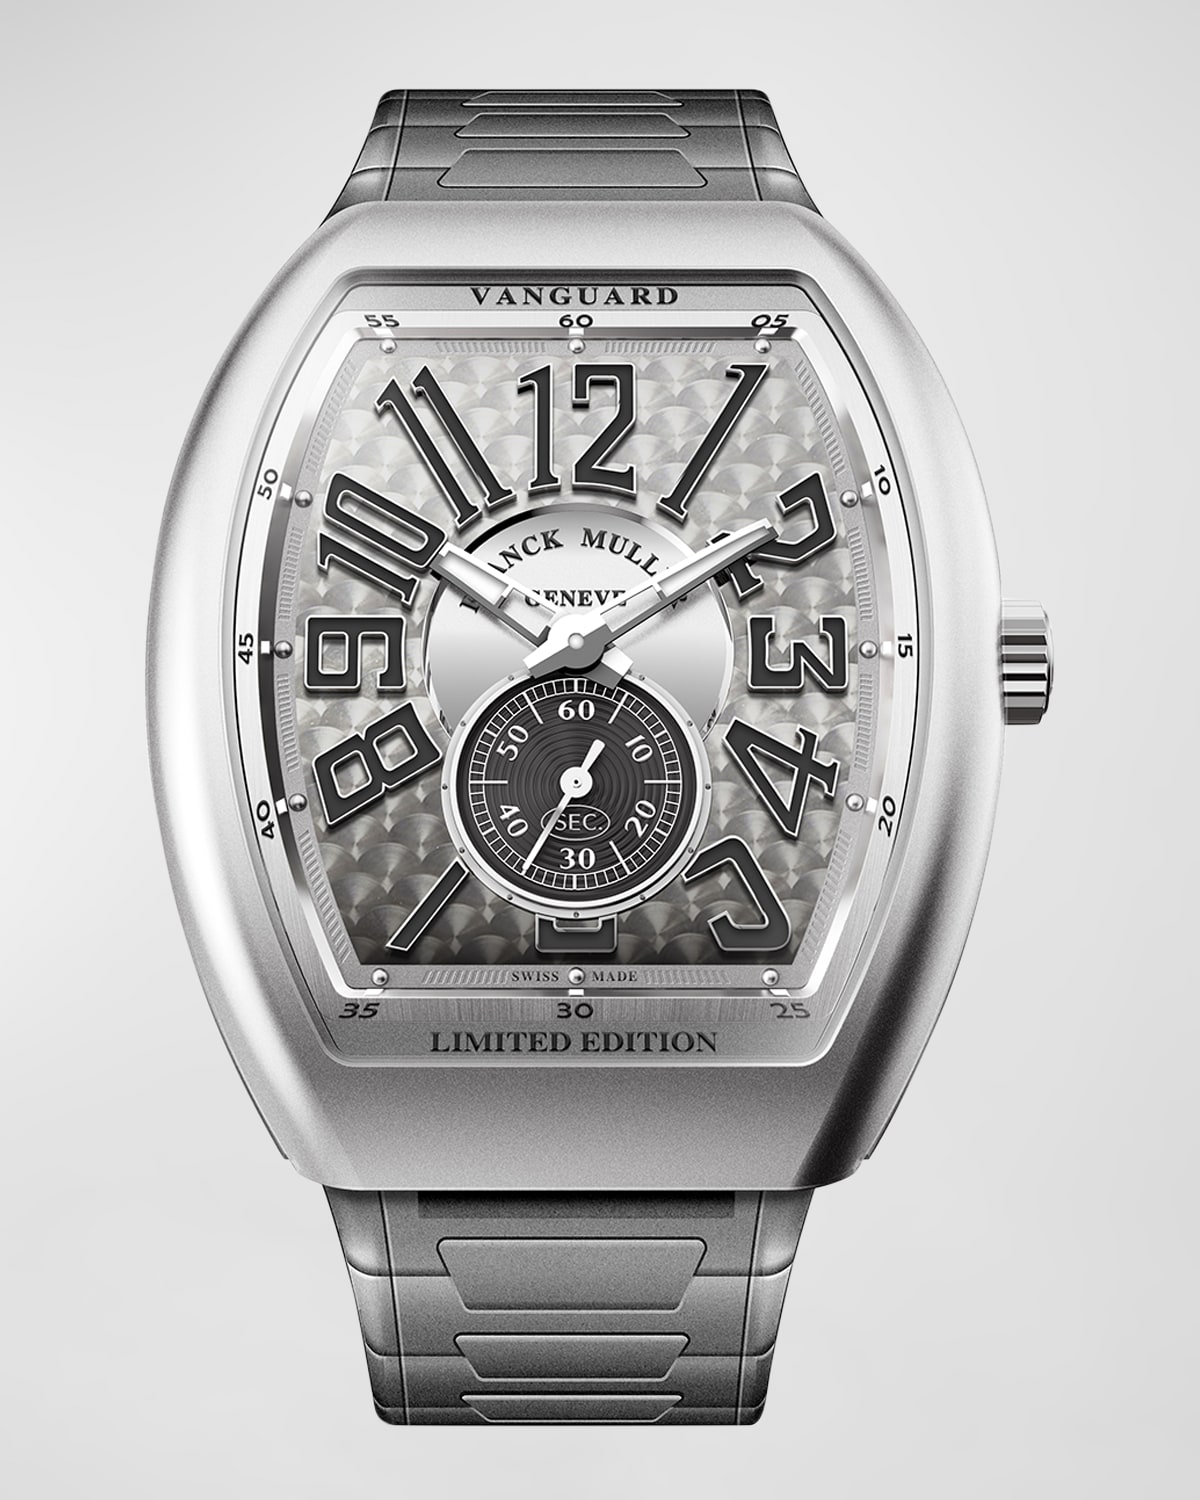 Franck Muller Men's Automatic Vanguard 1000 Colorado Grand Limited Edition Watch in Stunning Silver